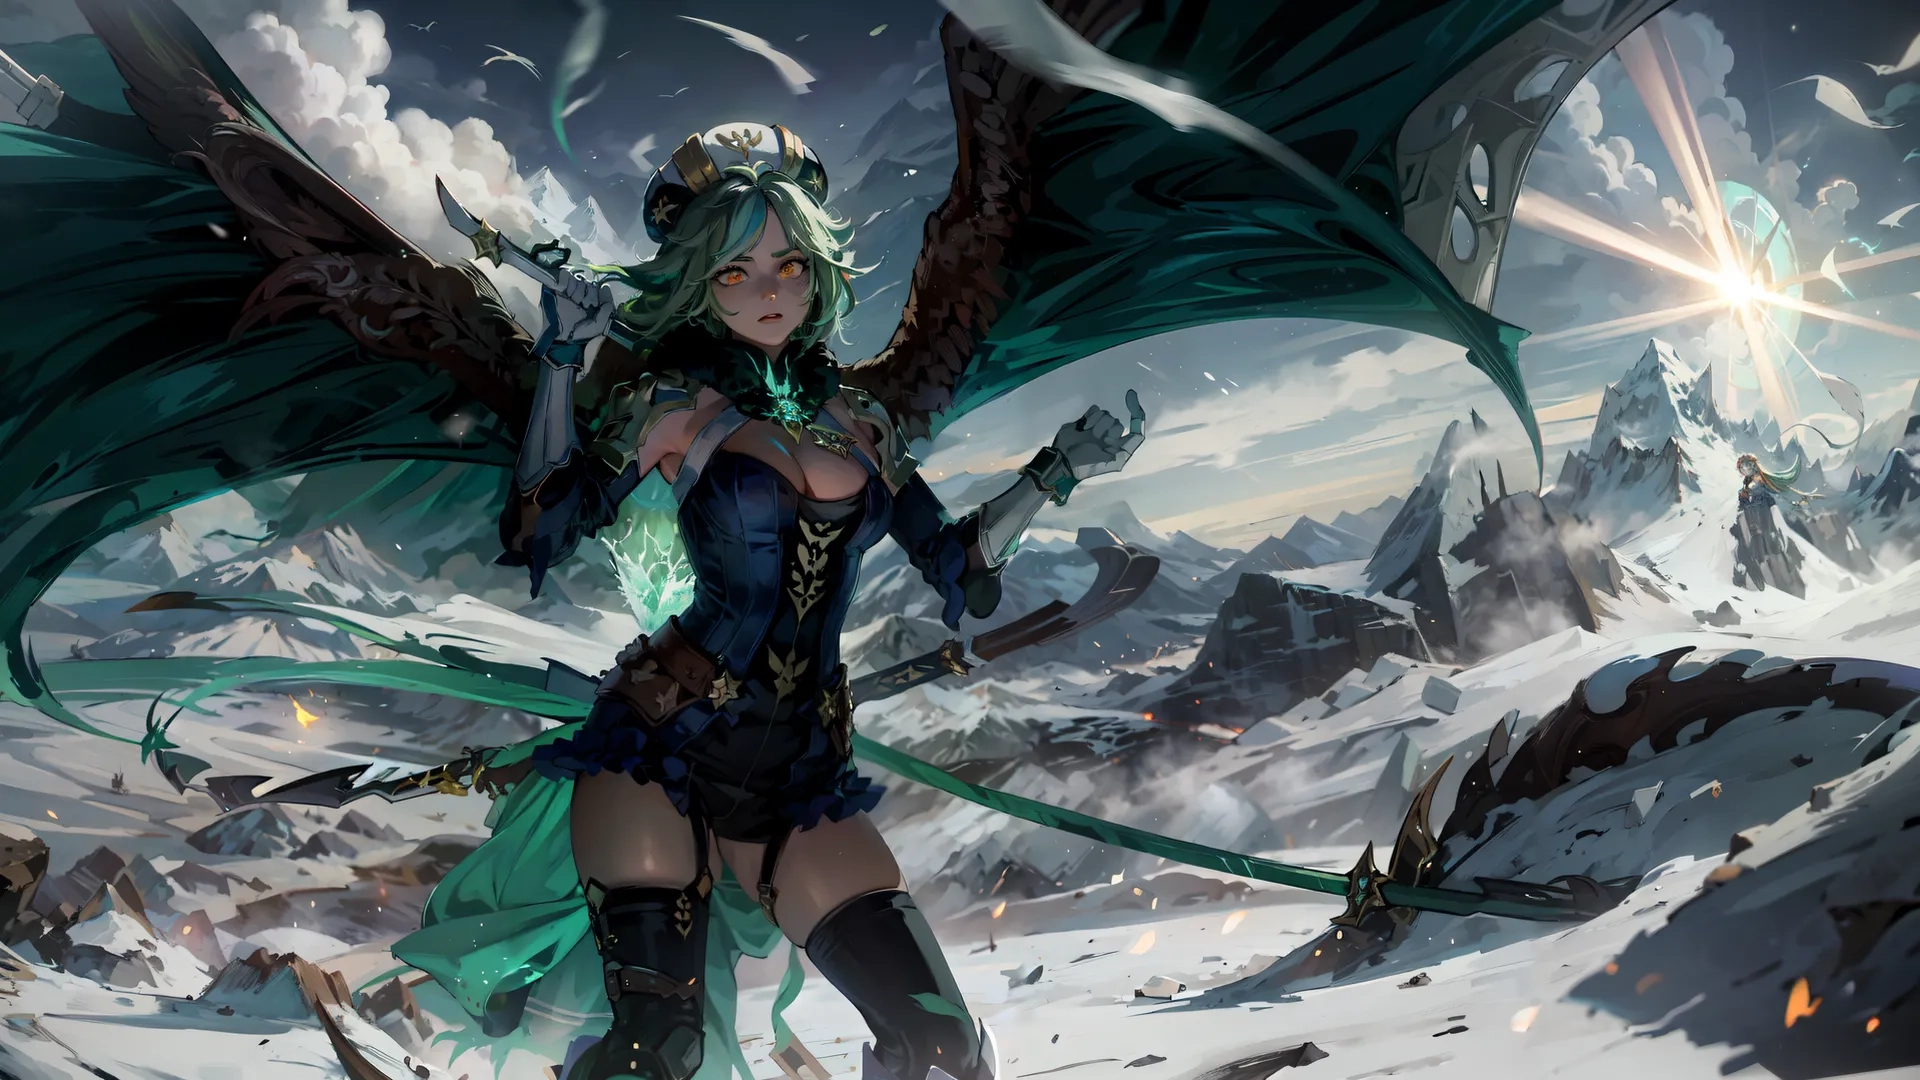 an icy mountain with a snow - covered, snow covered area and elves like characters standing on snow with wings in the air with bright green colors
